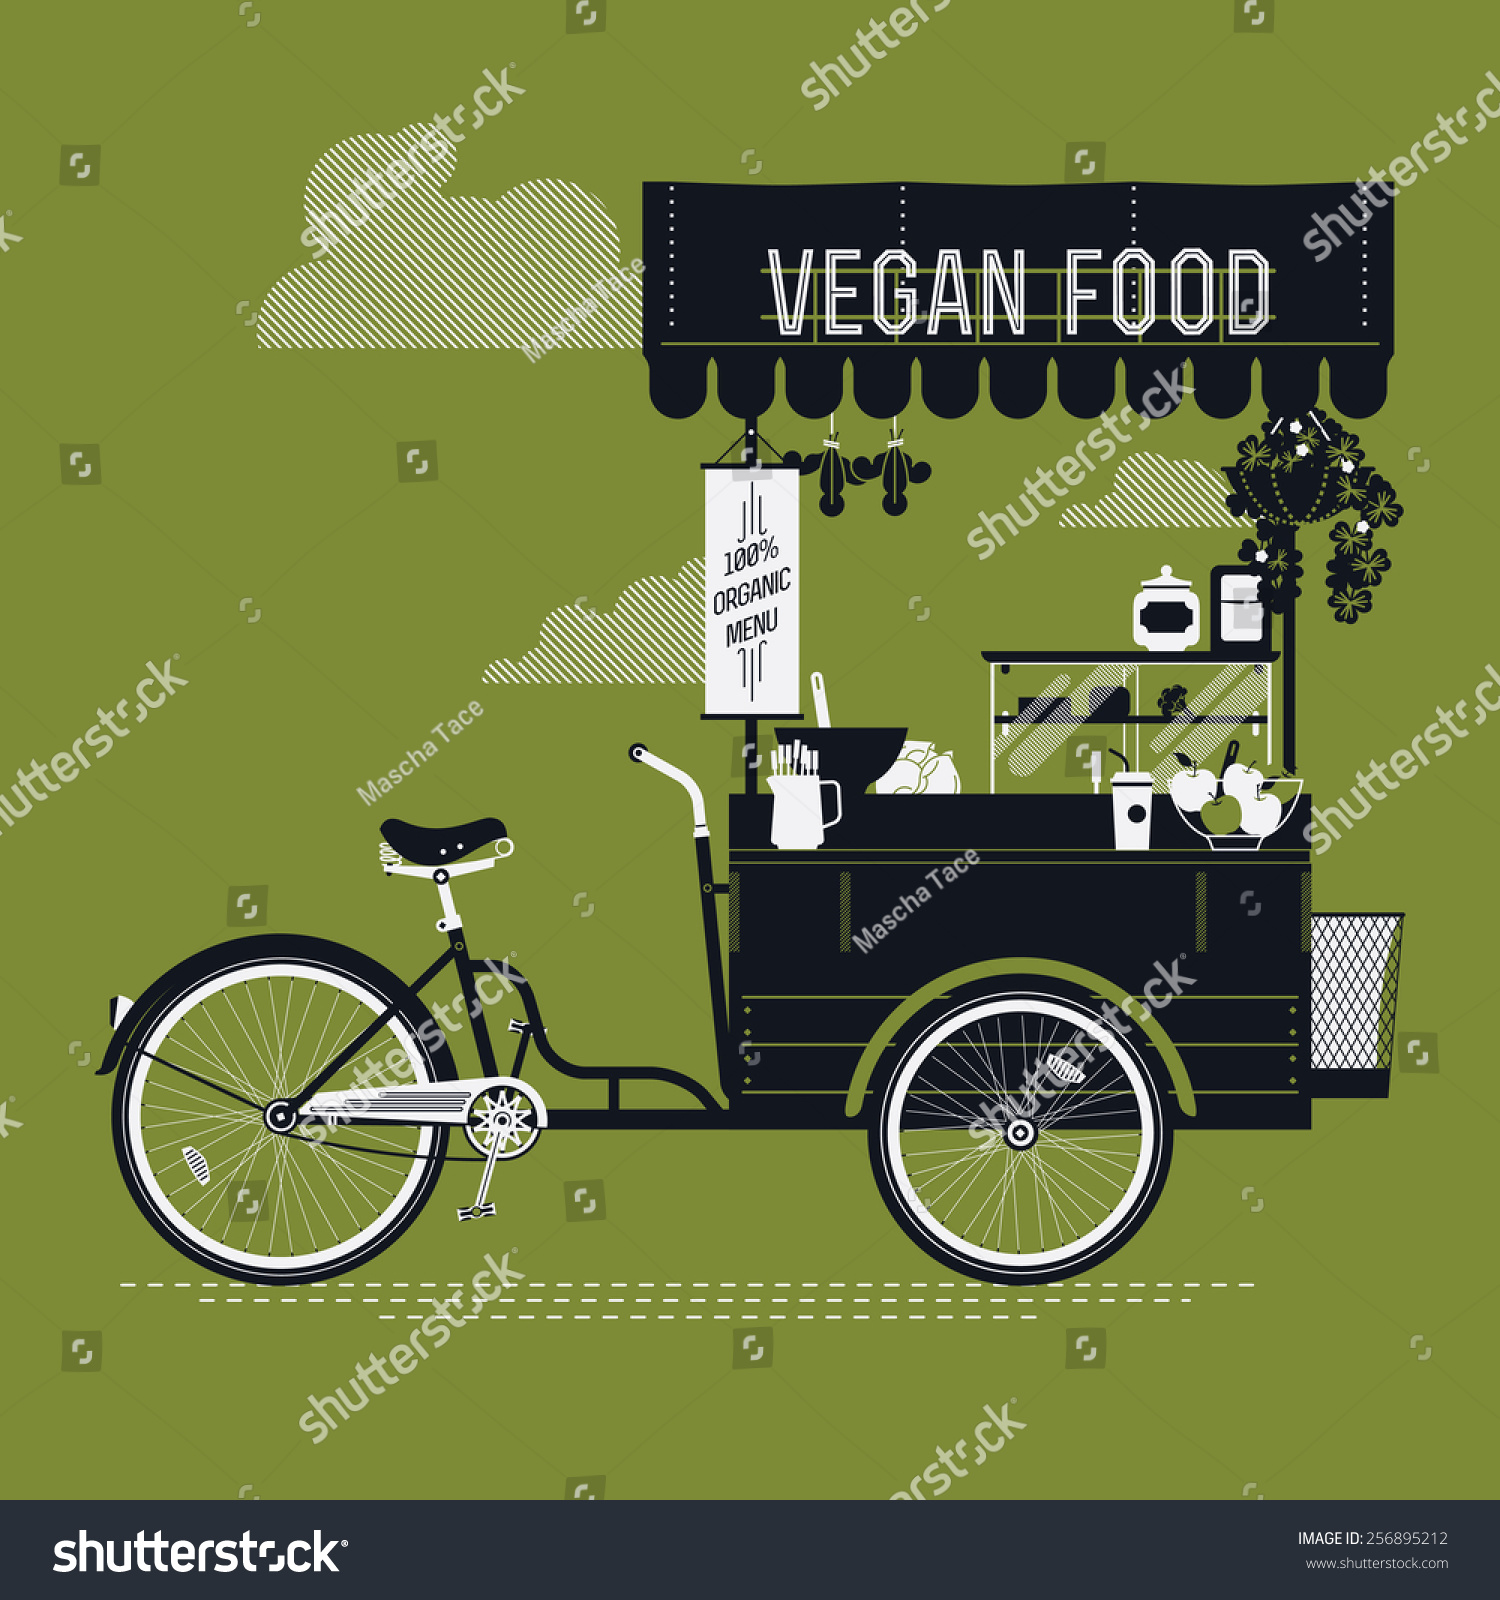 SVG of Creative vector detailed graphic design on vegan food with retro looking vending bicycle cart with awning, refreshments, bowls, bottles, wooden crate on rear rack and more | Mobile cafe illustration svg